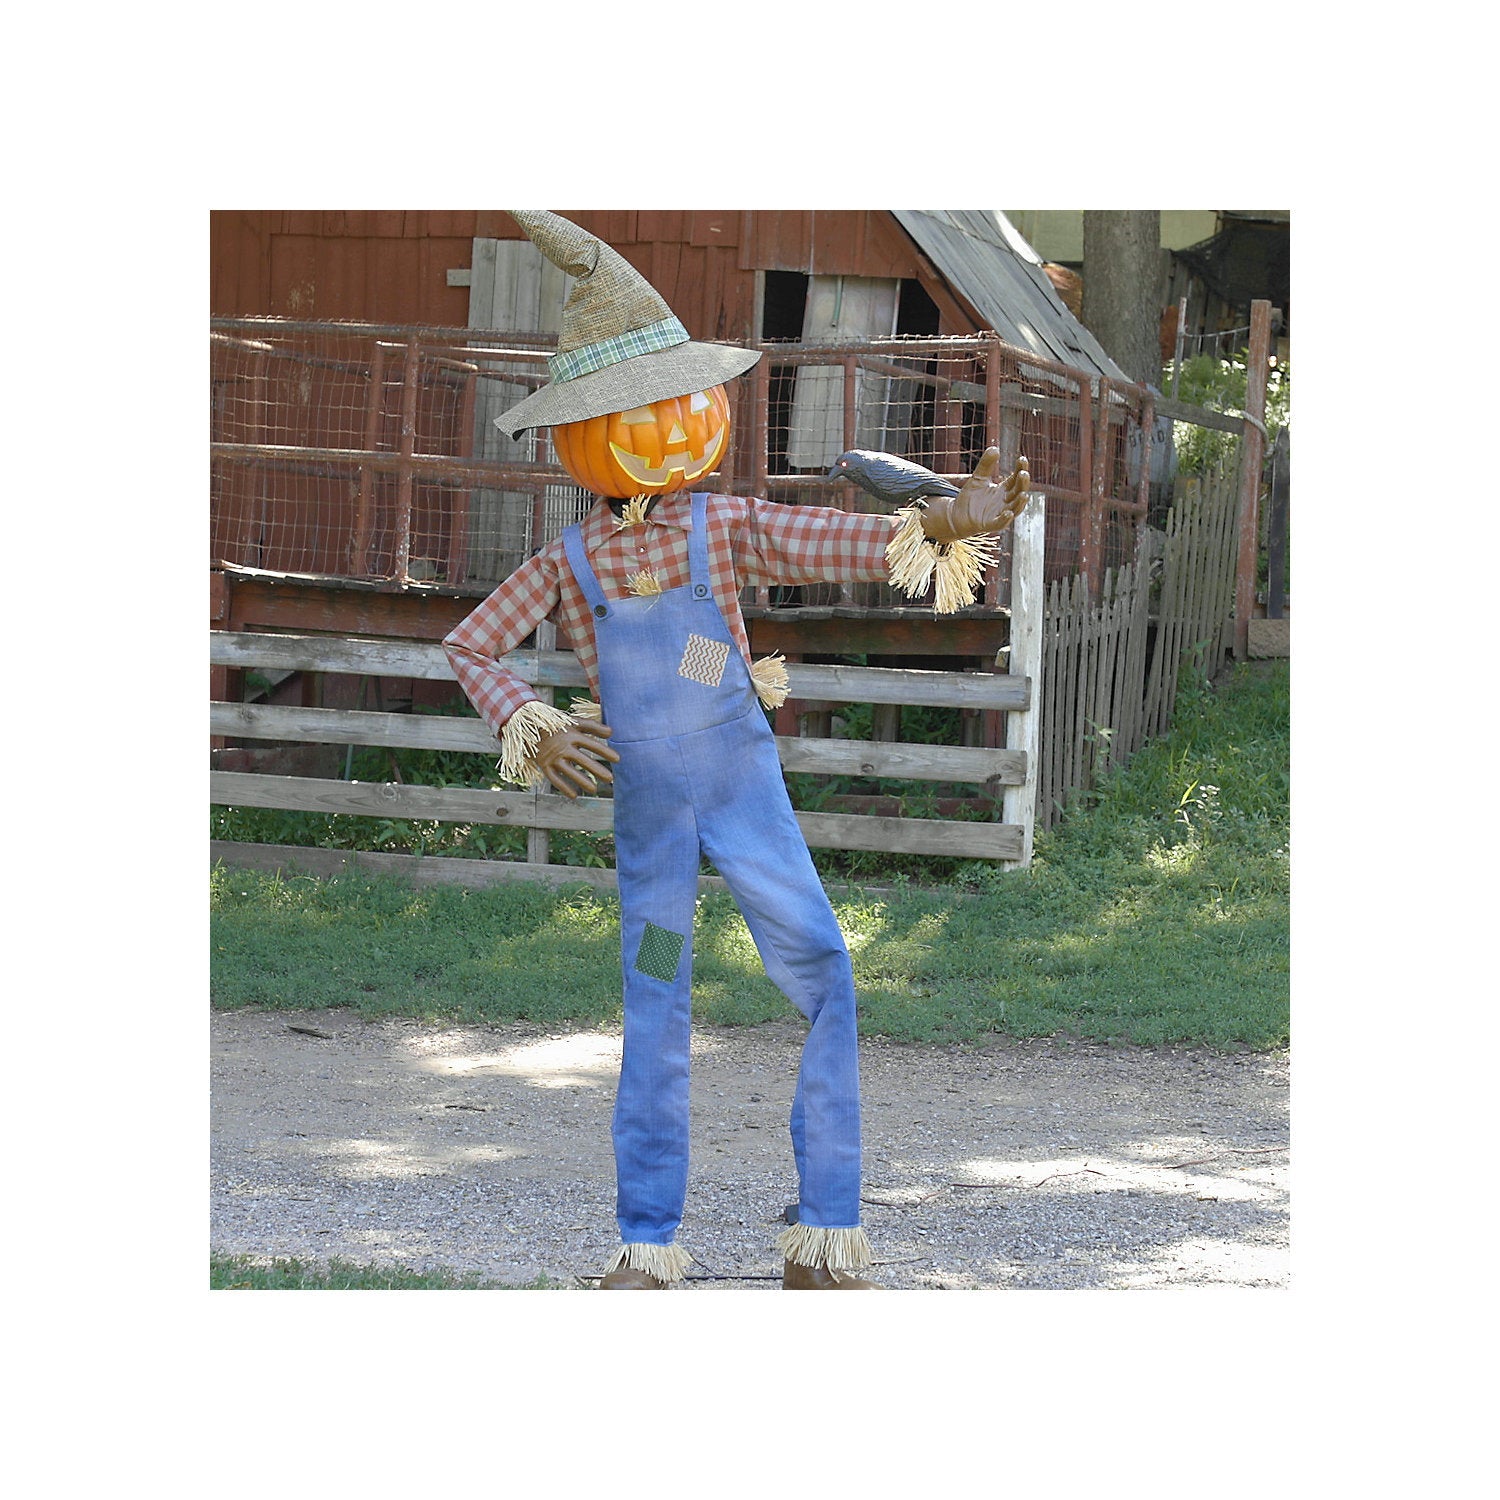 6-ft-animated-whimsical-scarecrow